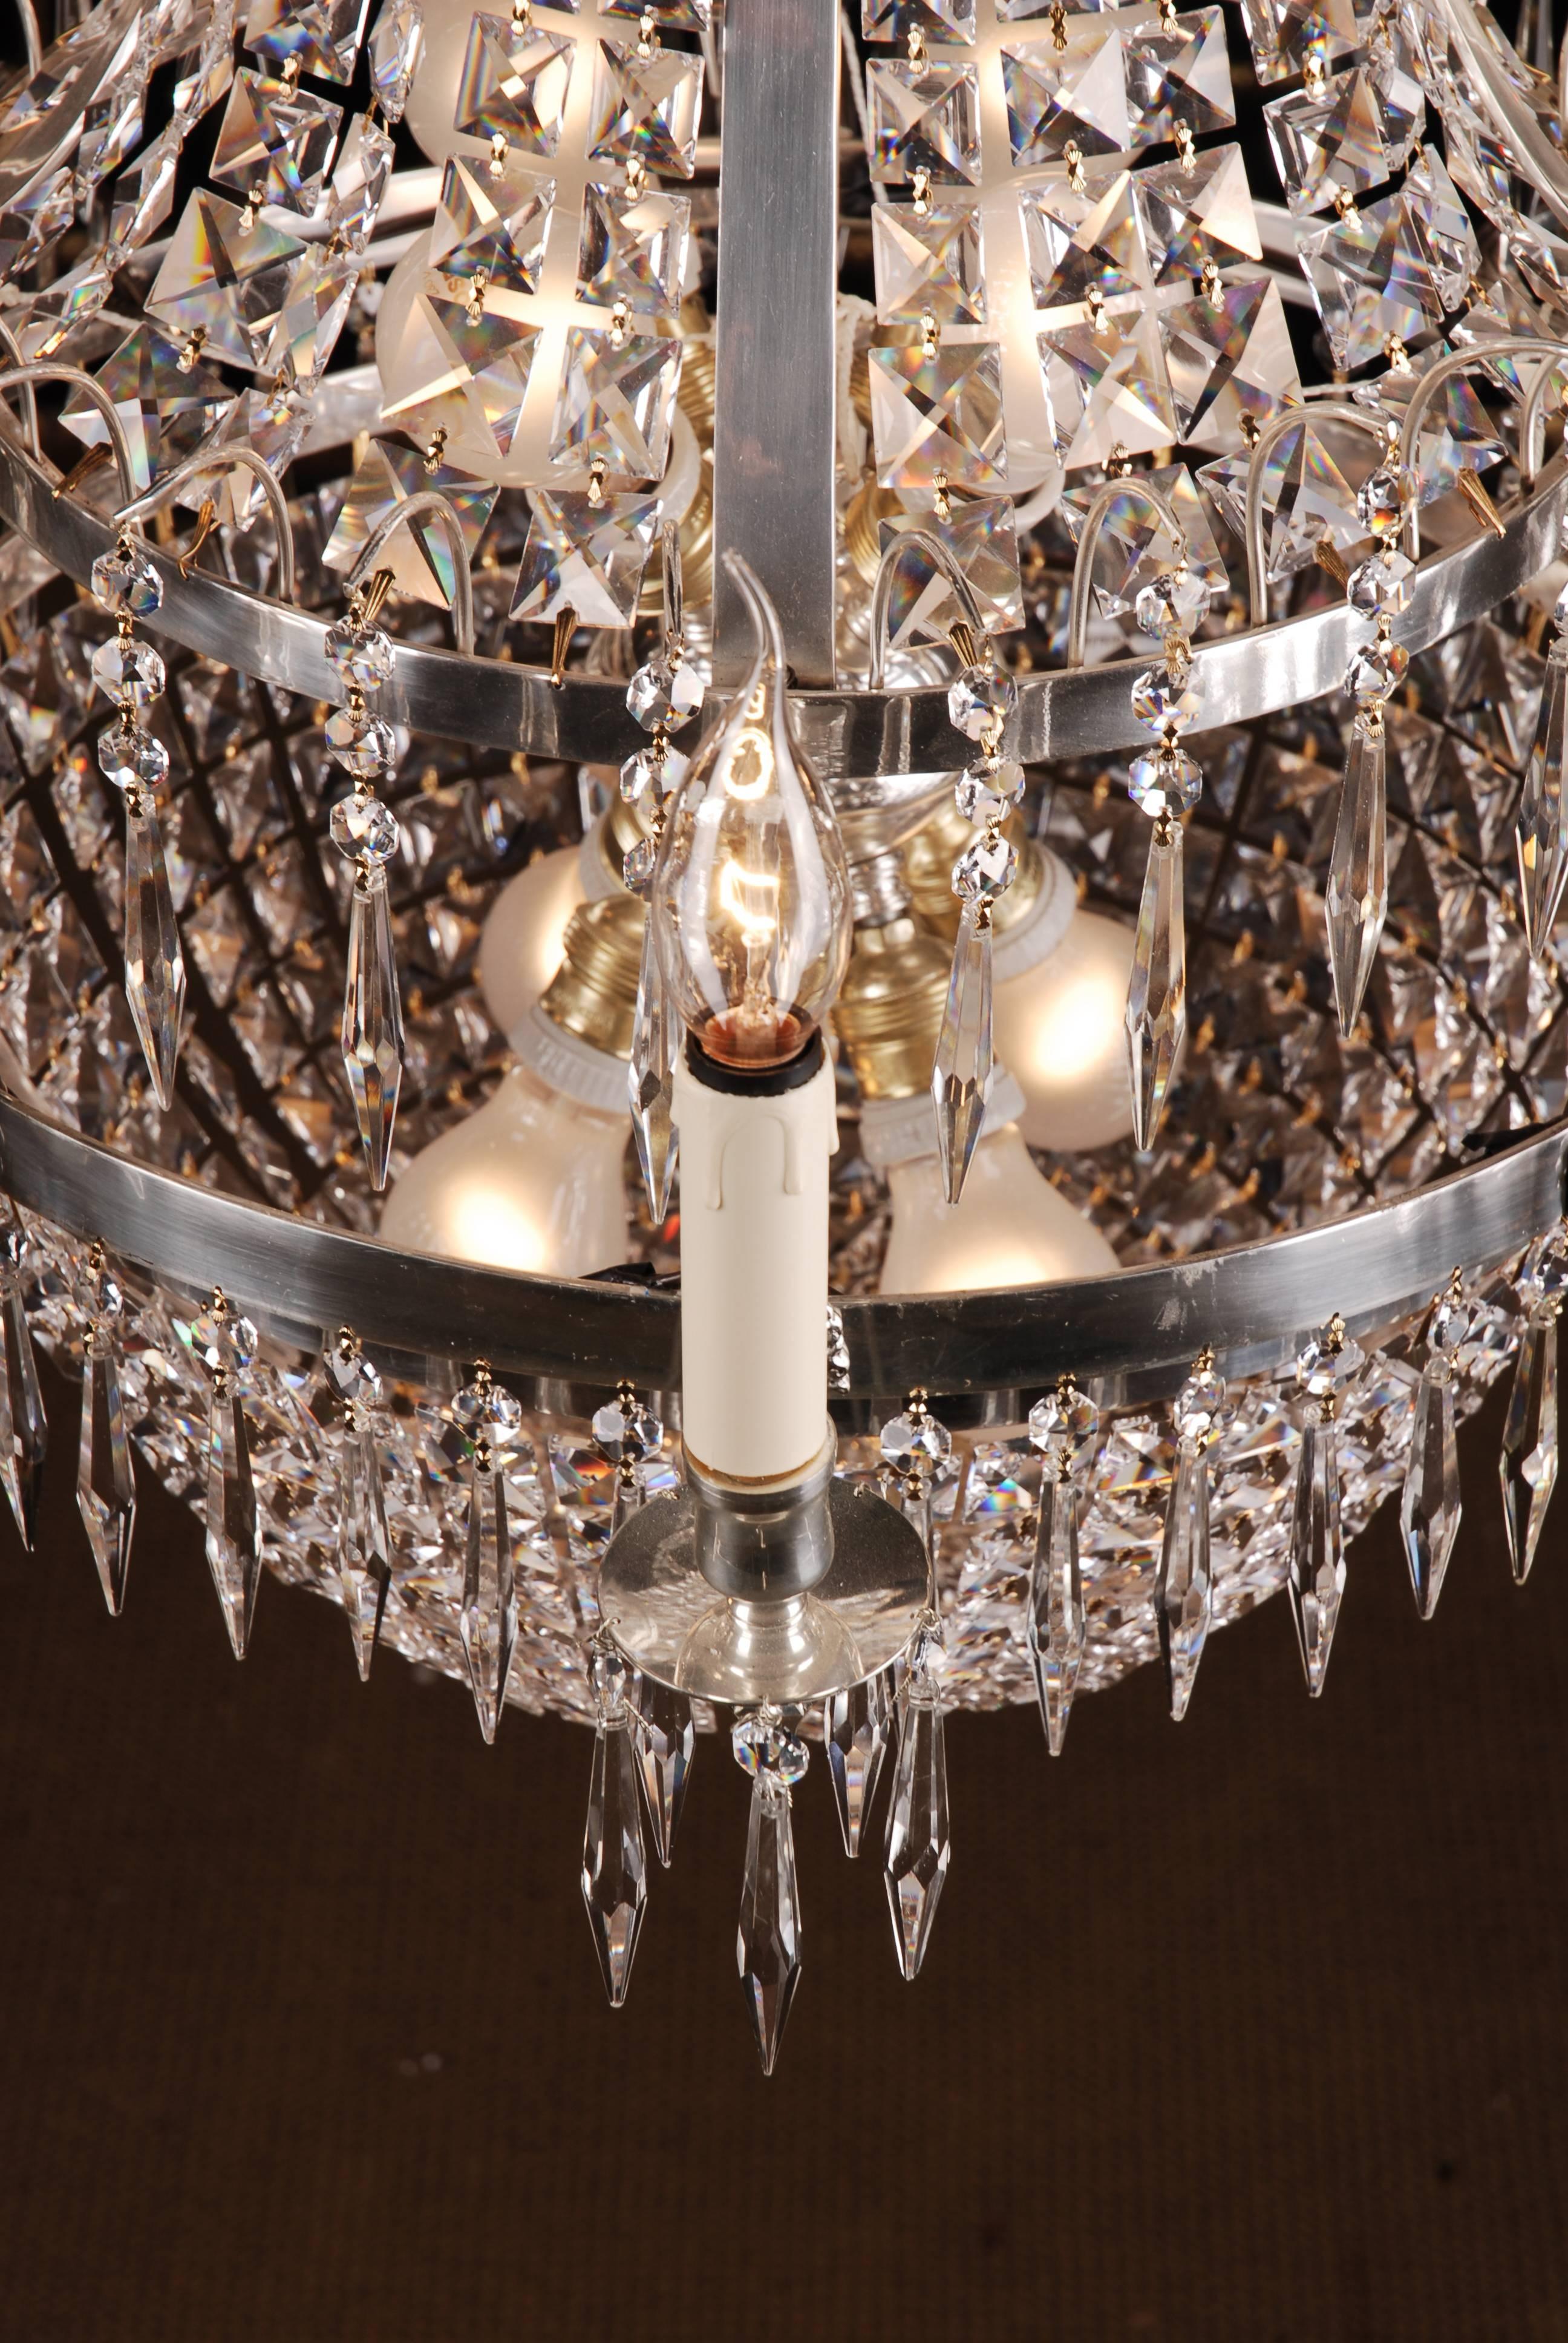 Polished Swedish Empire Ceiling Chandelier in Classicist Style